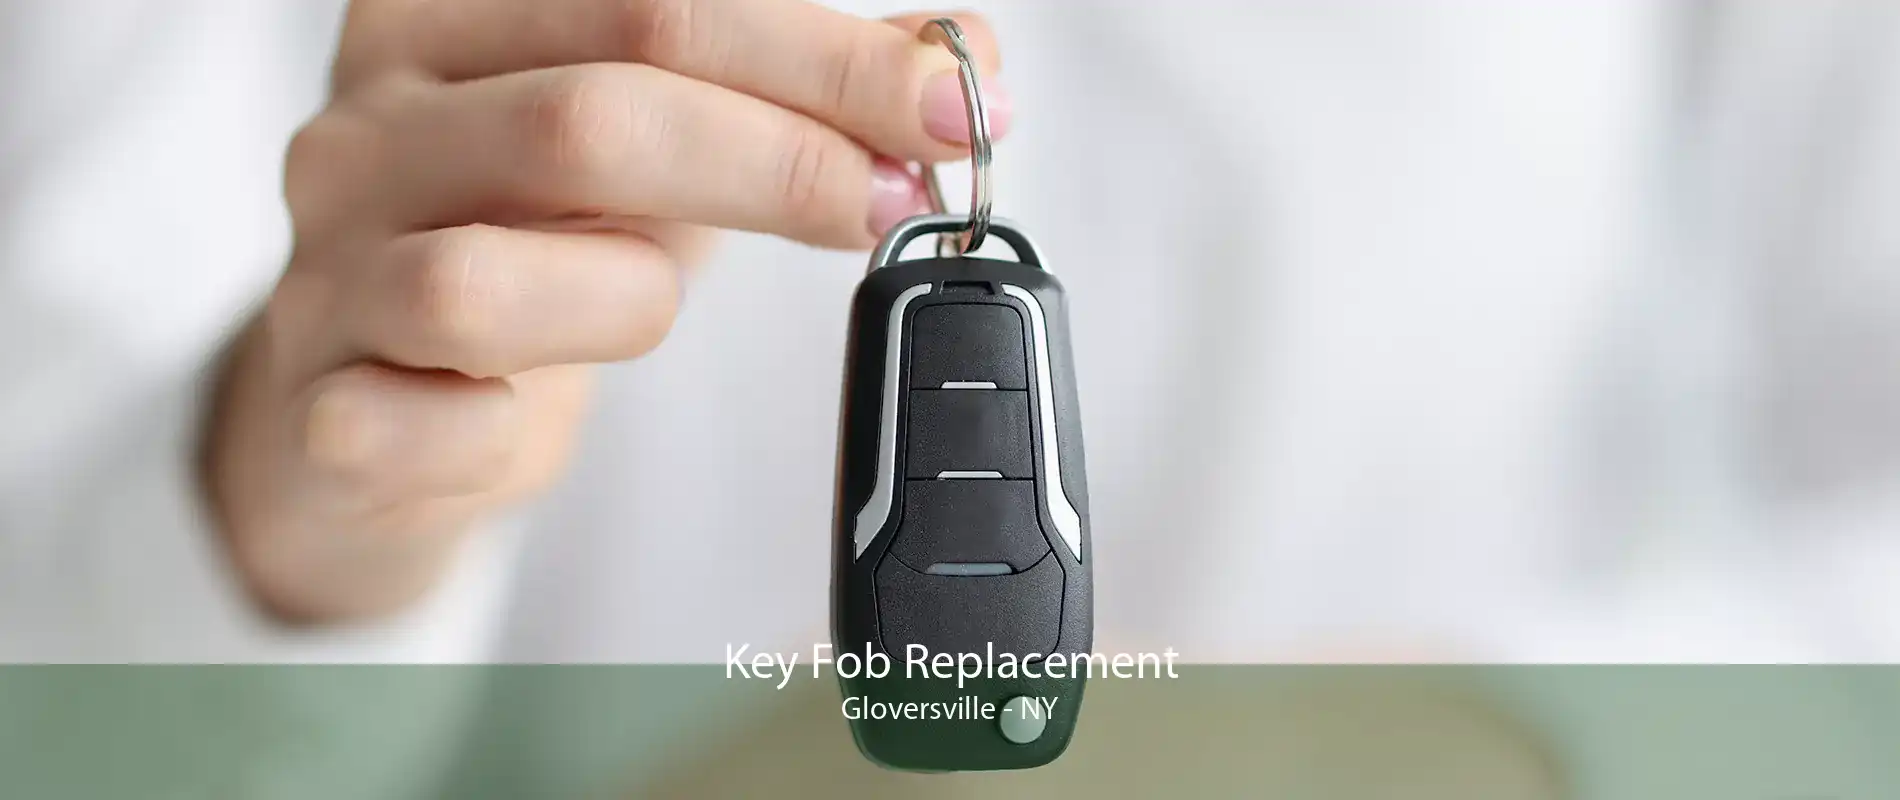 Key Fob Replacement Gloversville - NY